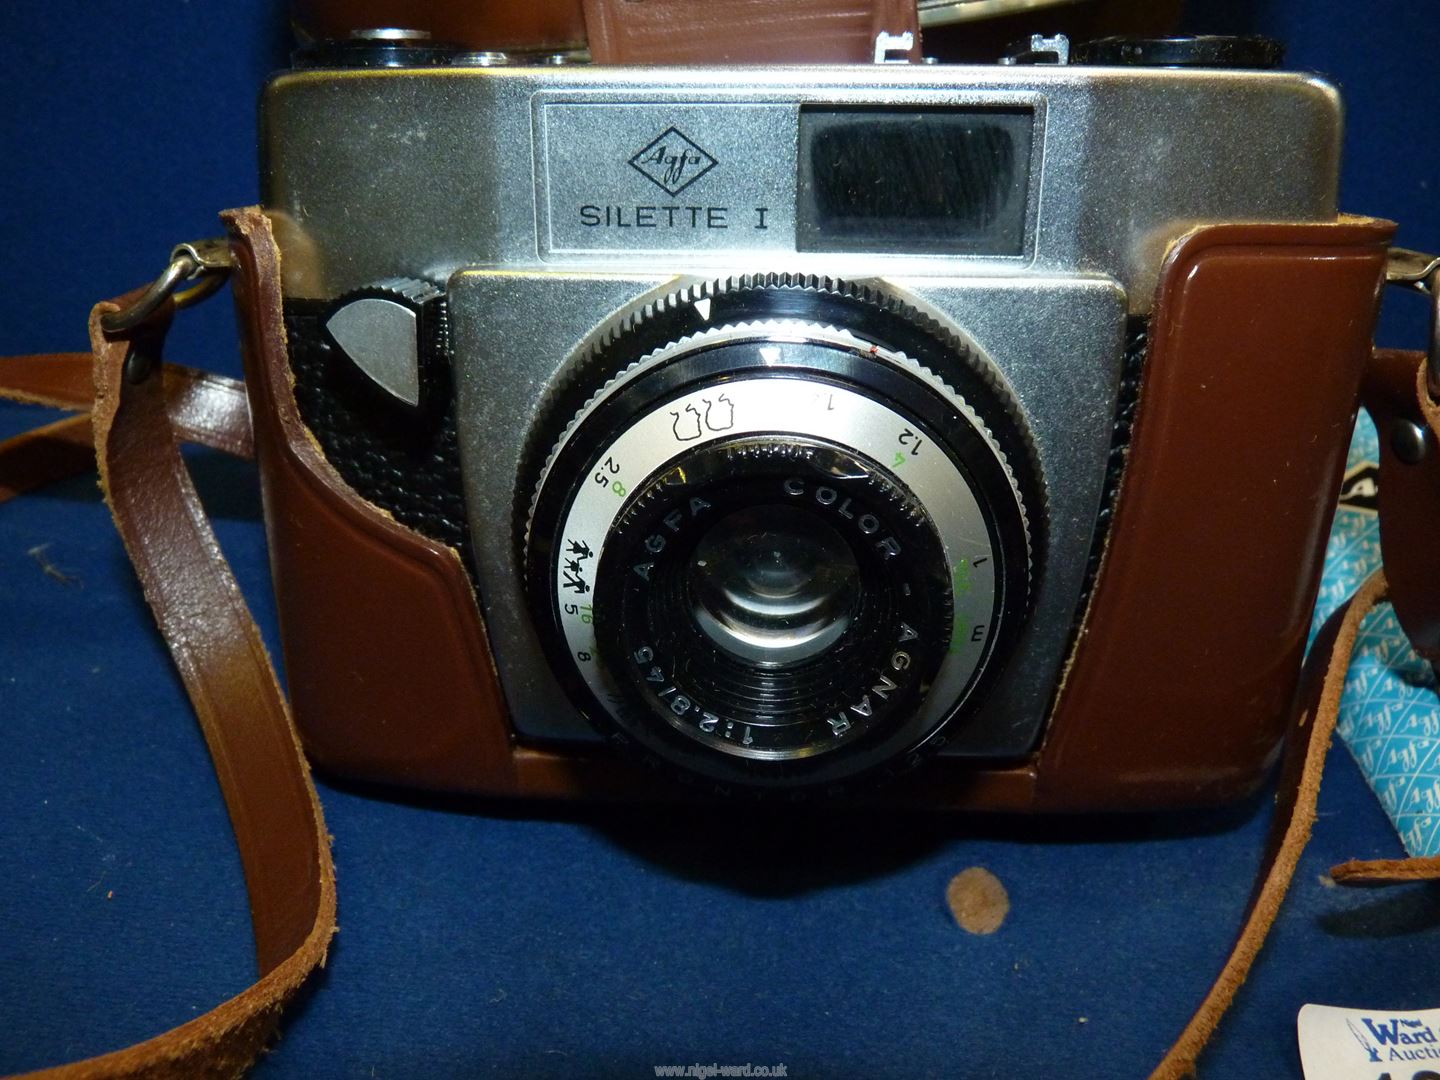 A cased Agfa Silette I camera made in Germany.